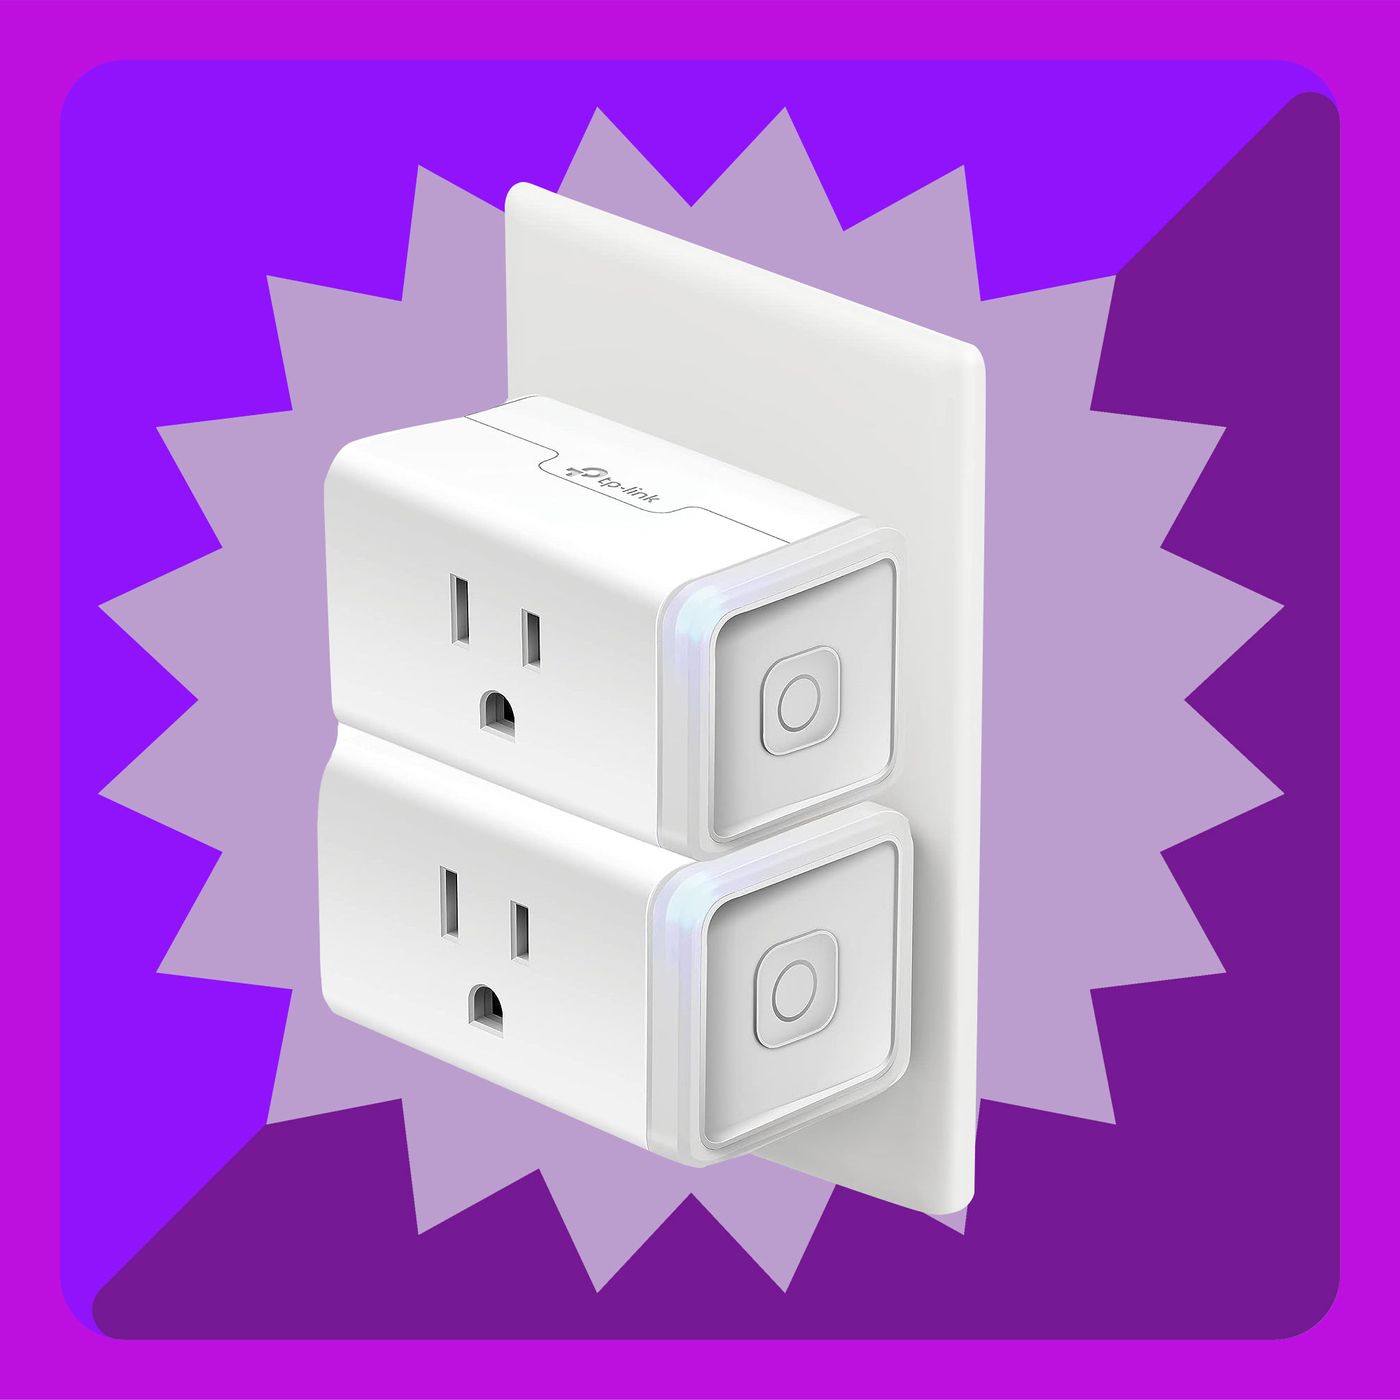 Upgrade Your Outlets With 30 Percent off These Smart Plugs